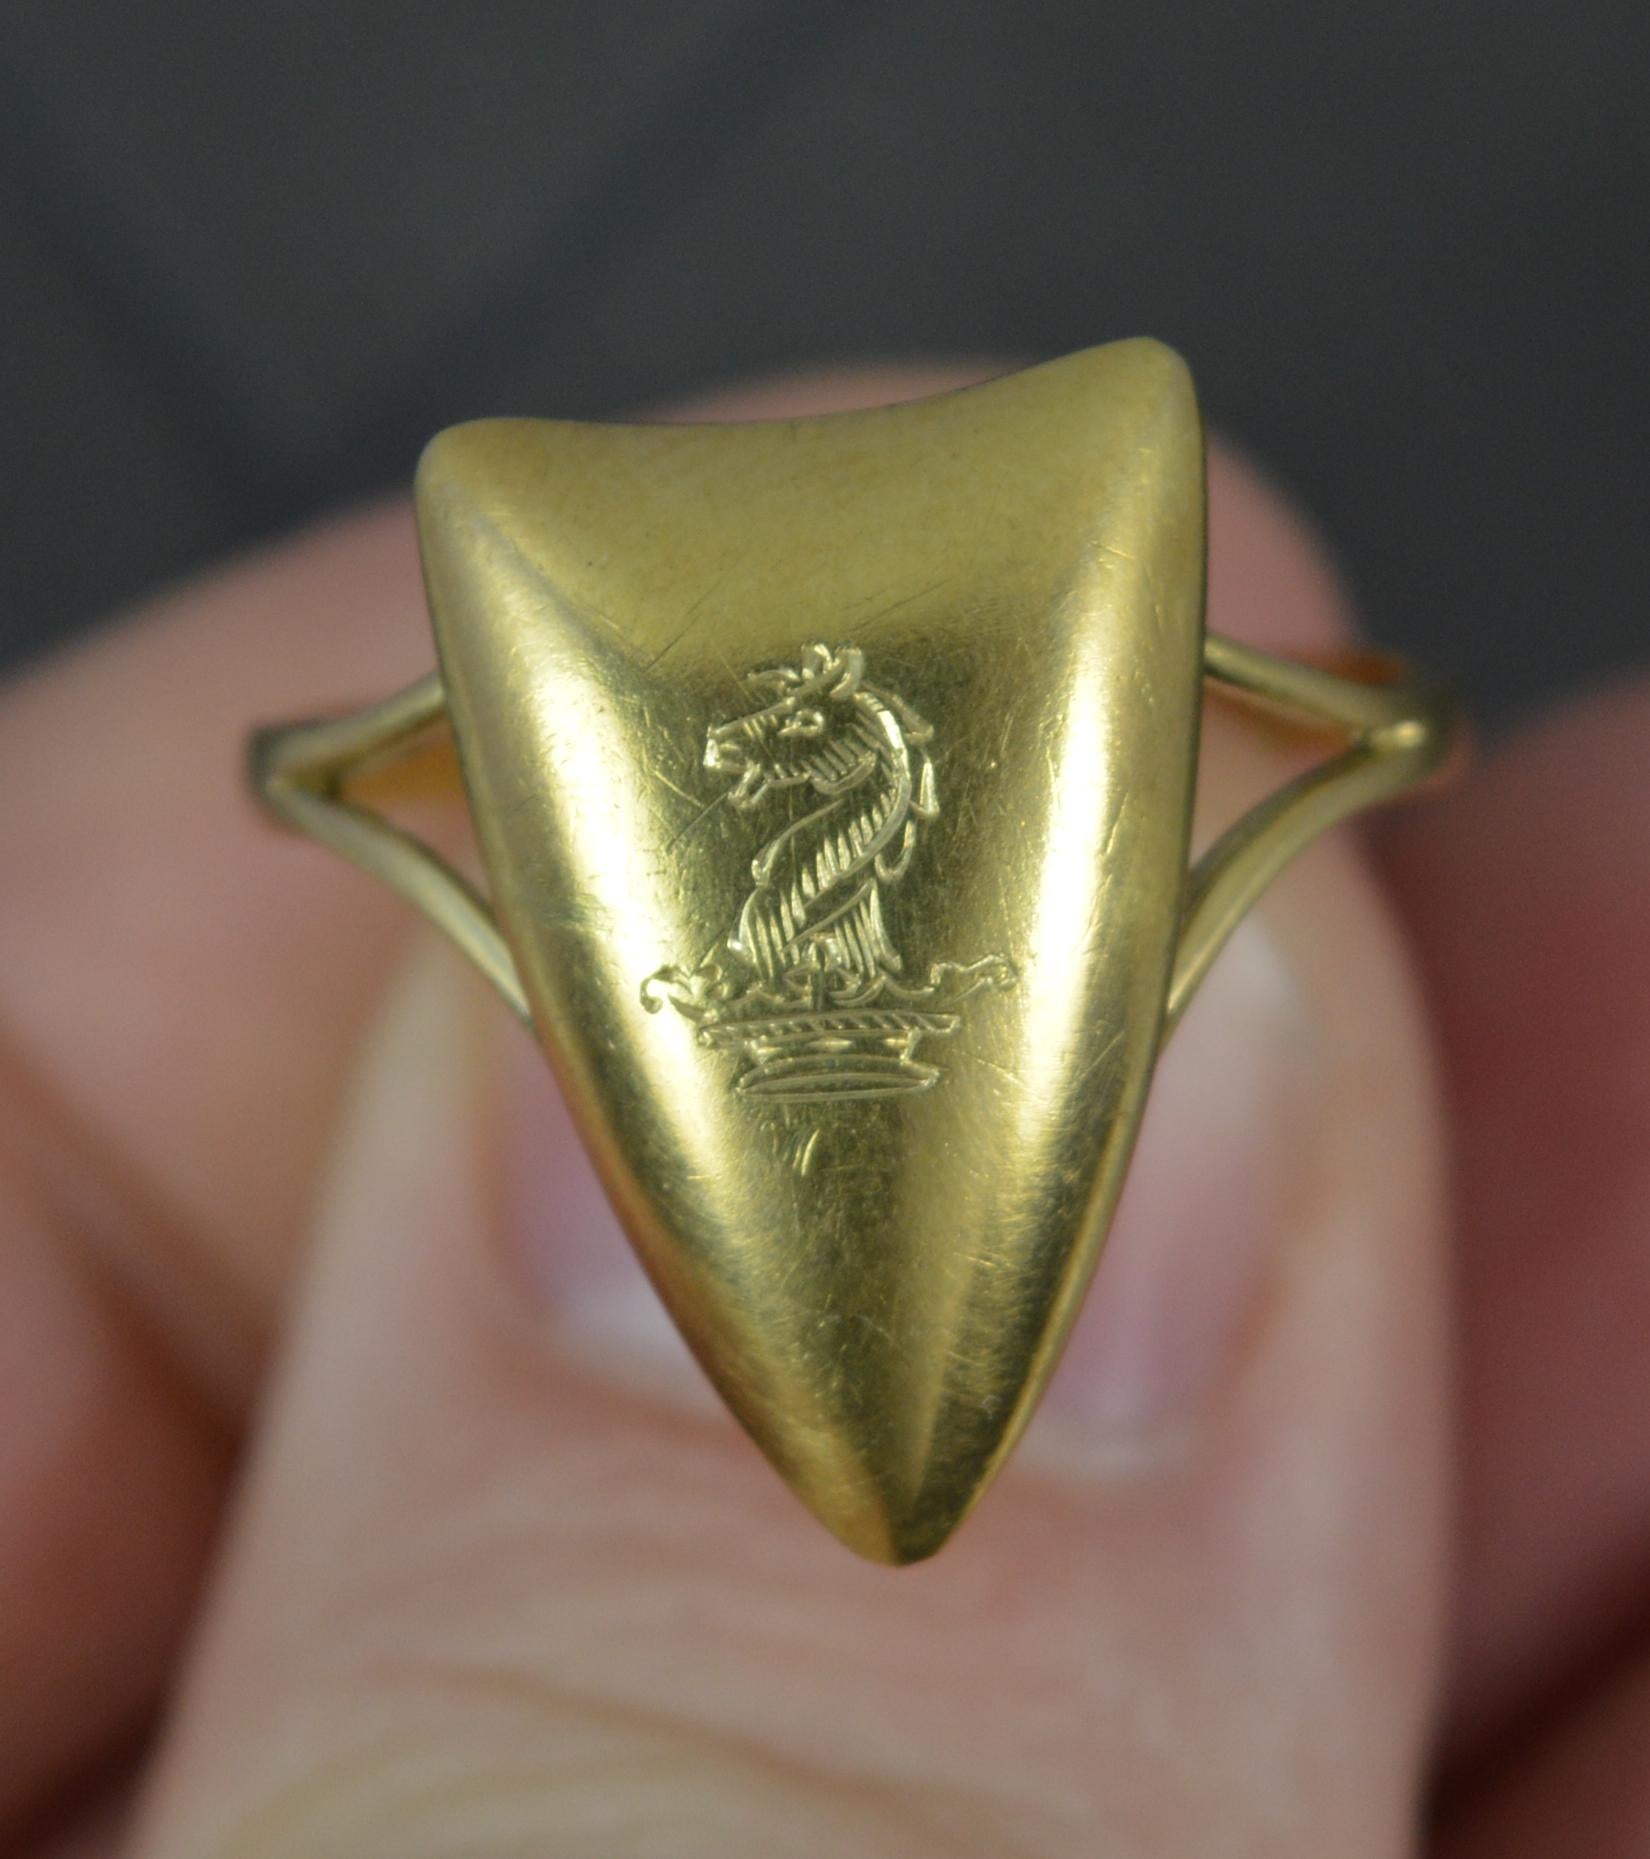 Women's Antique 18 Carat Gold and Crested Shield Intaglio Signet Seal Ring